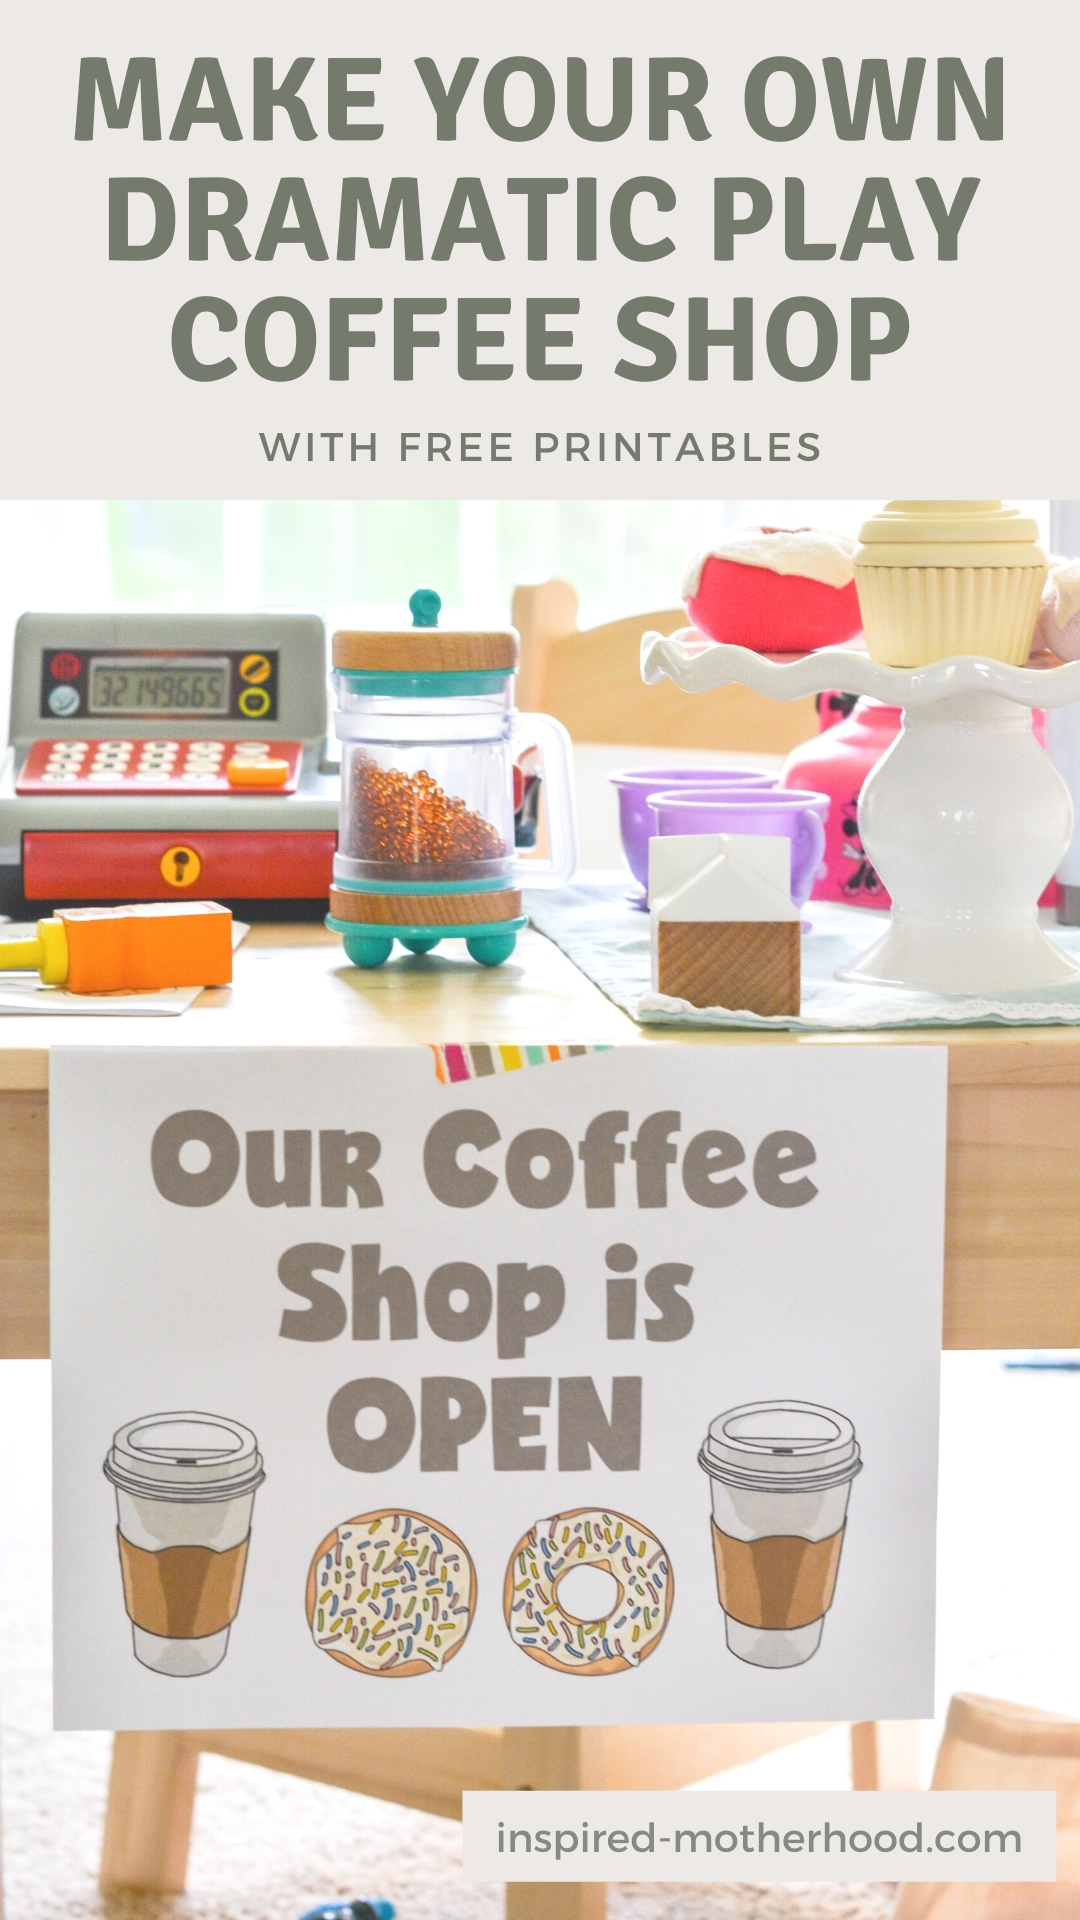 Dramatic play is great for a preschoolers development. You can make your own pretend play coffee shop at home! Use items you already have and download the free printable to set it up in your playroom.